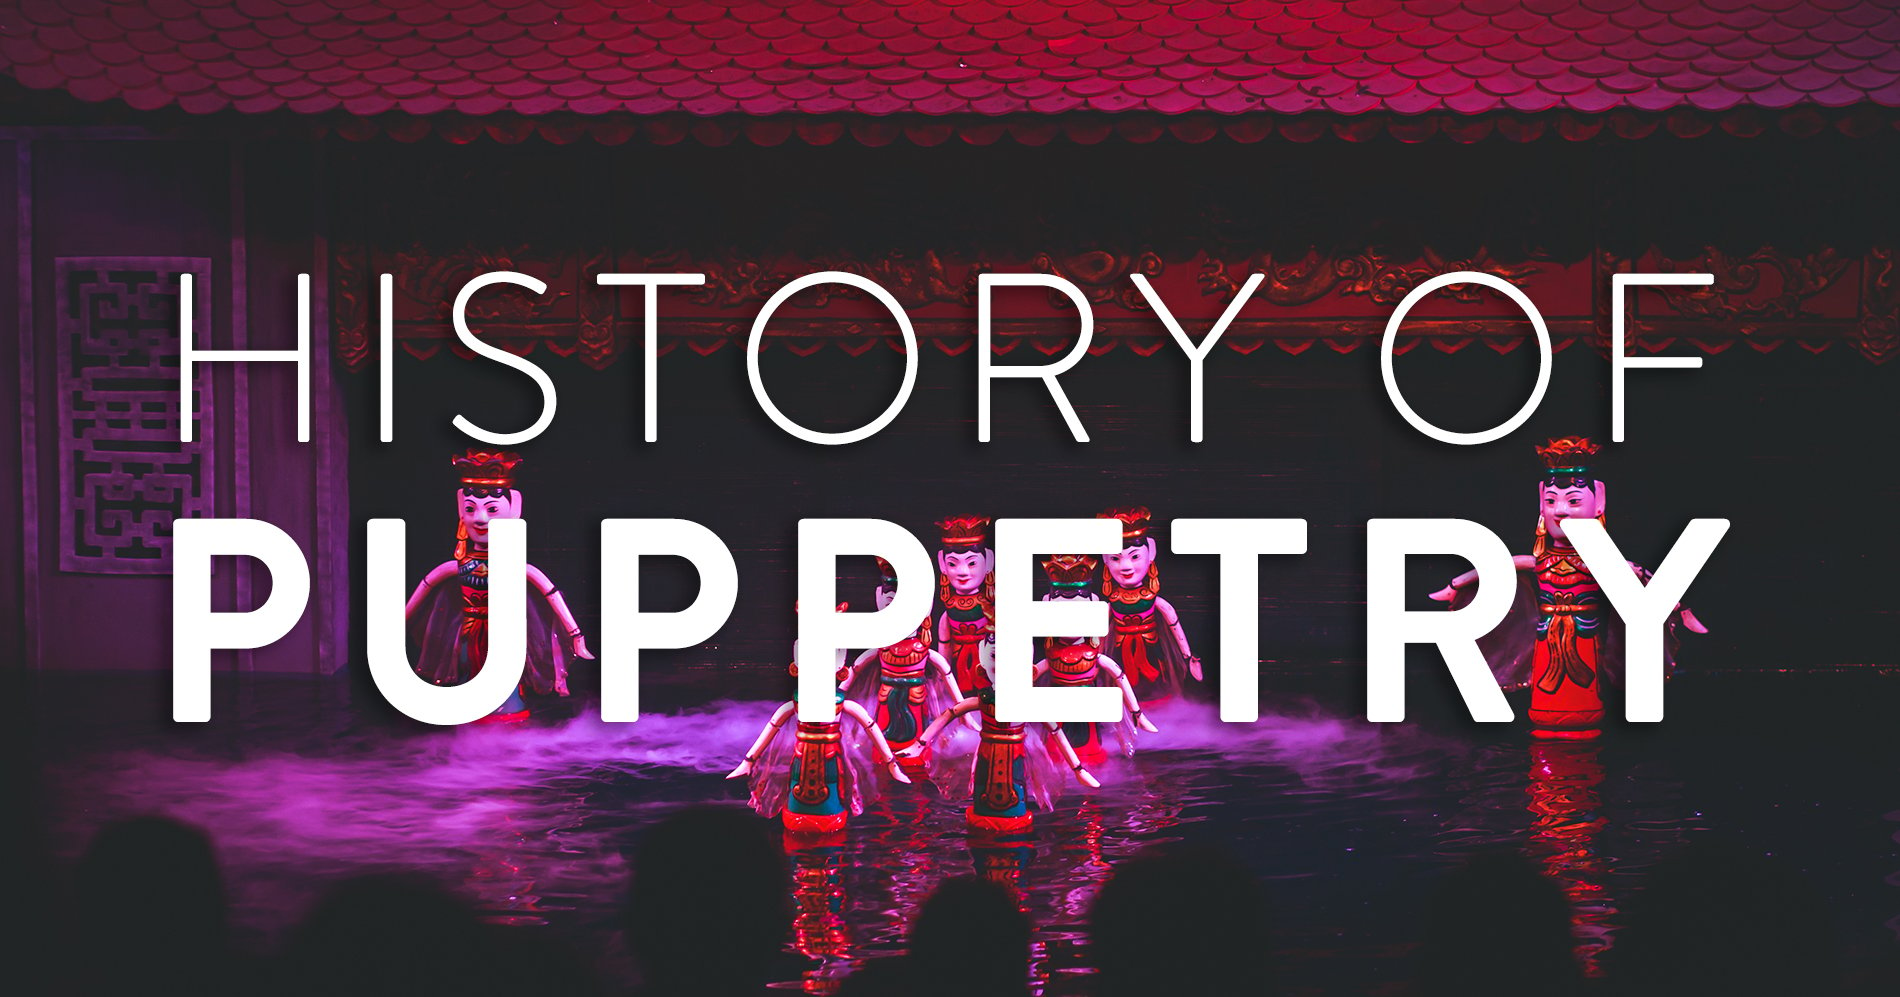 Puppetry, Definition, History, Characteristics, Types, & Facts